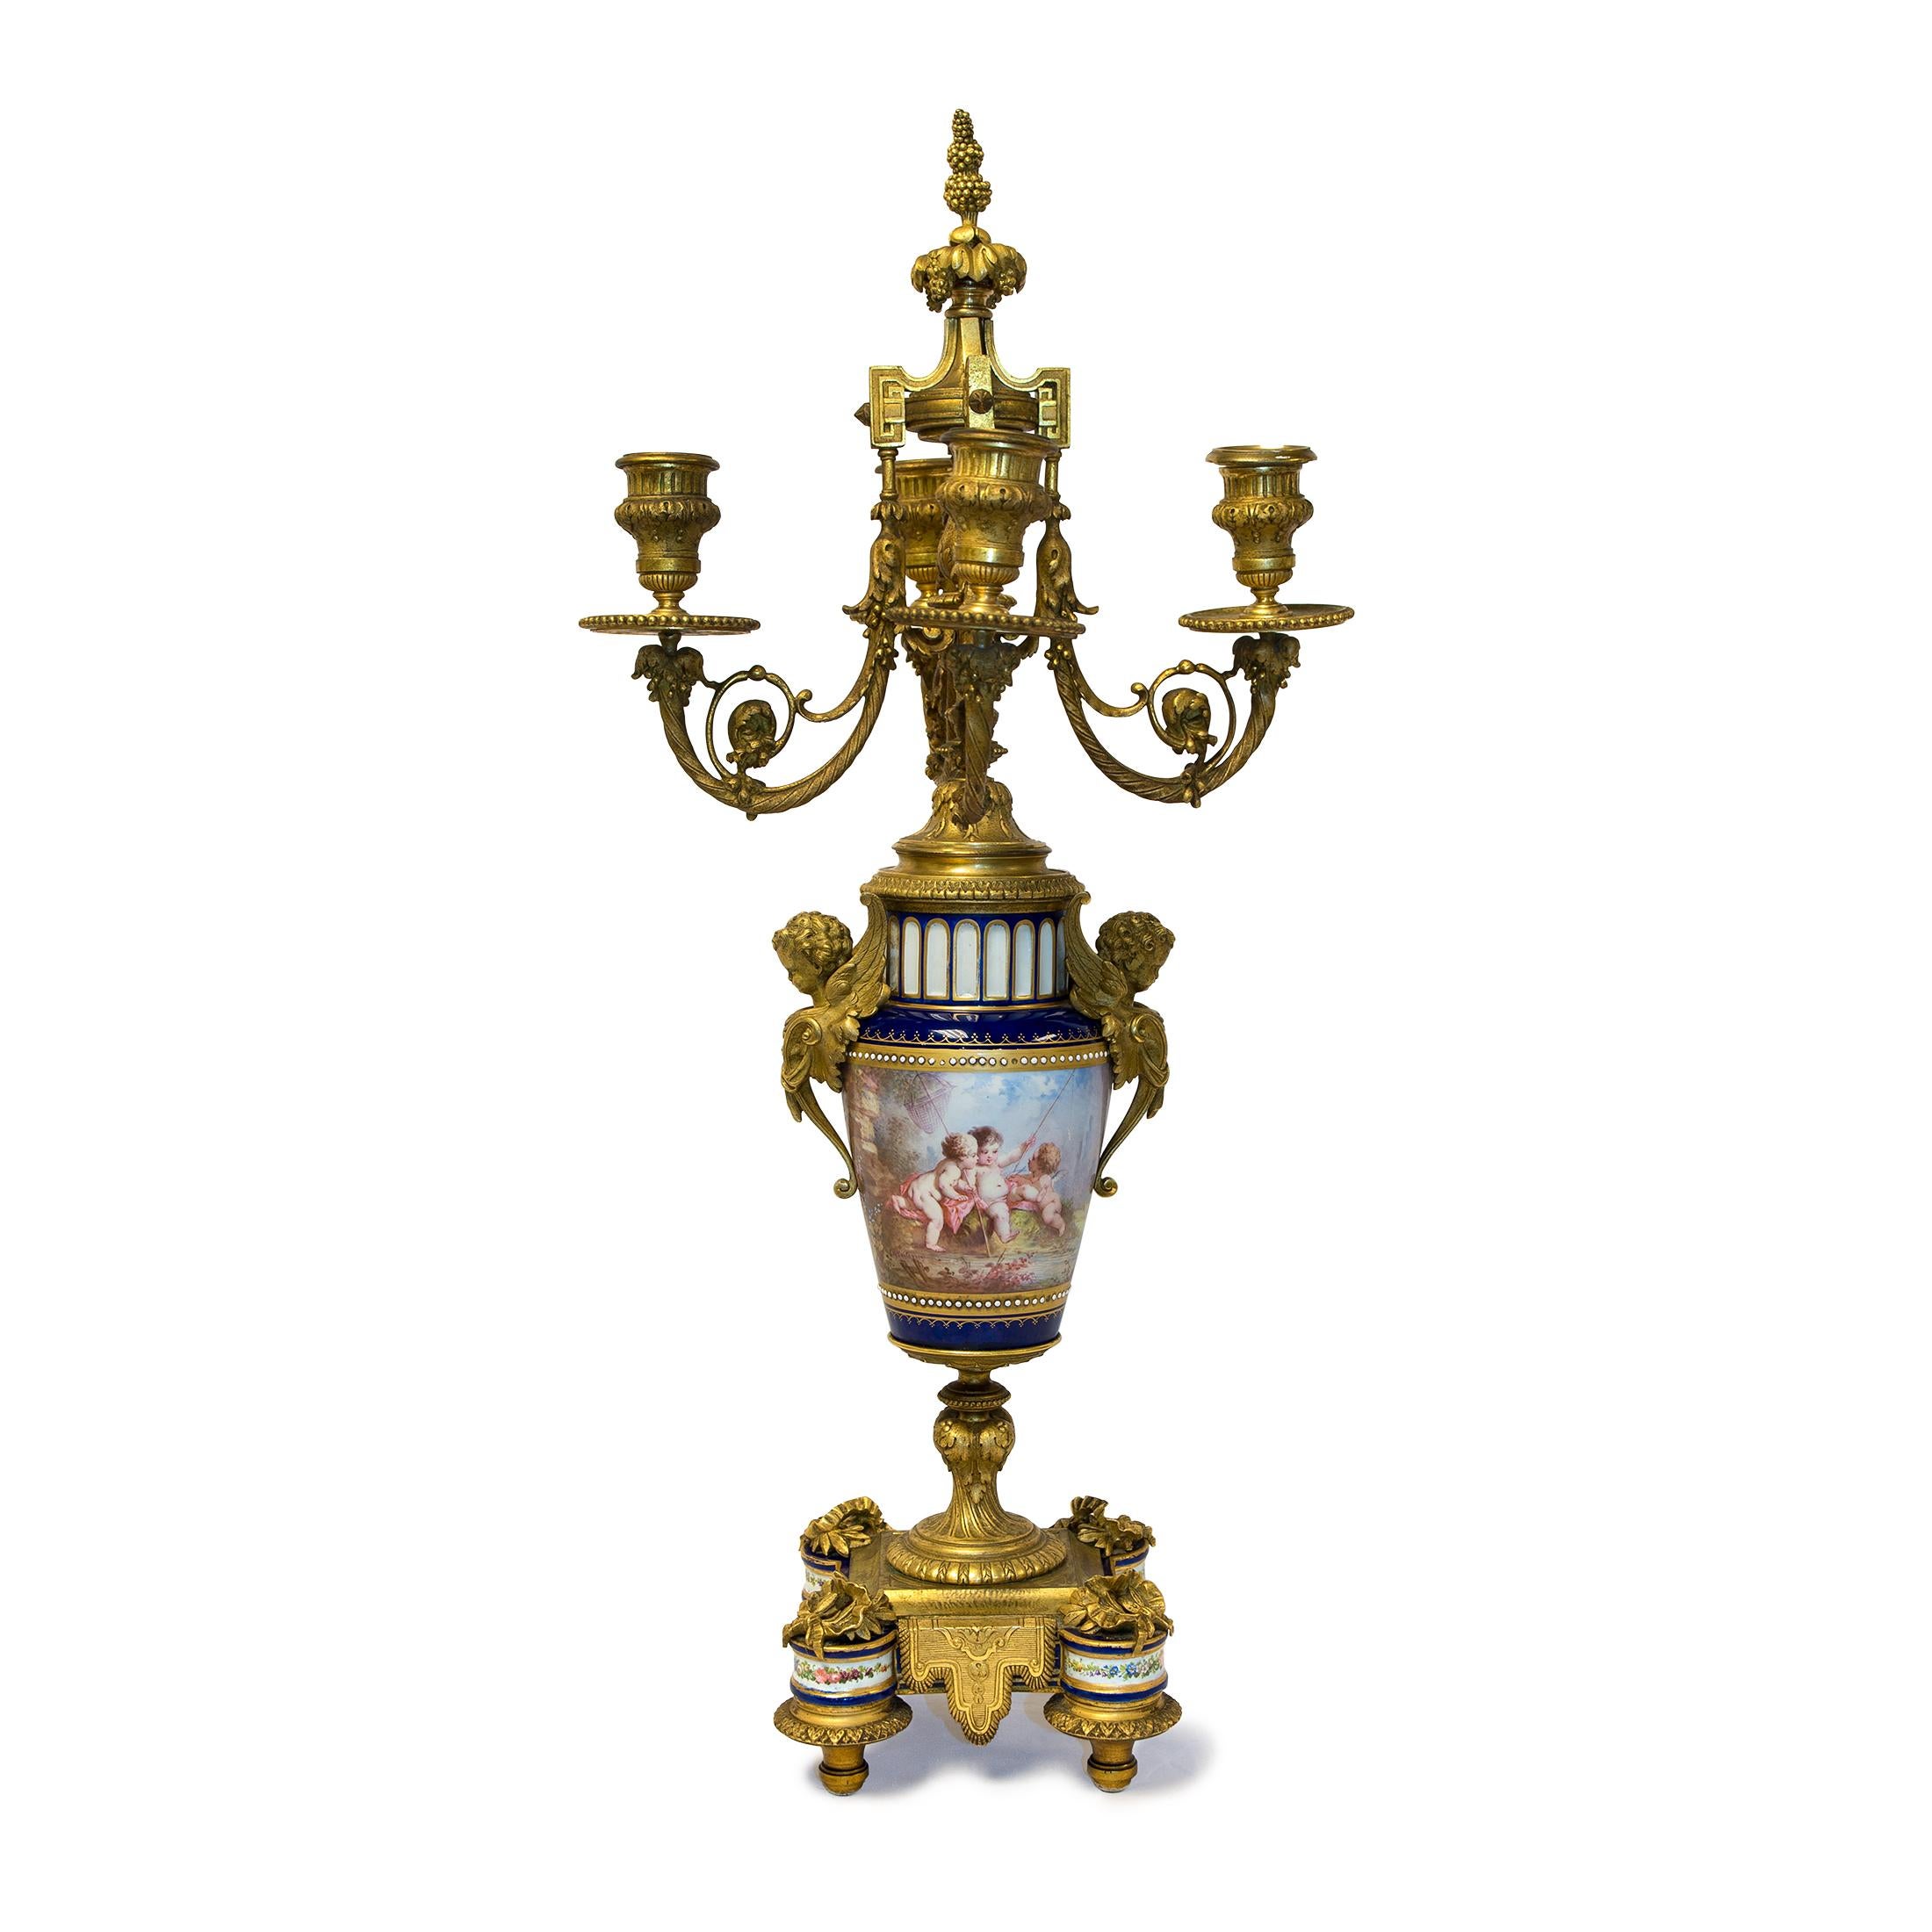 Rare pair of four-branch gilt bronze and jeweled cobalt blue ground Sèvres style porcelain candelabras
Date: 19th Century
Origin: French
Dimension: 23 in x 10 1/2 in.